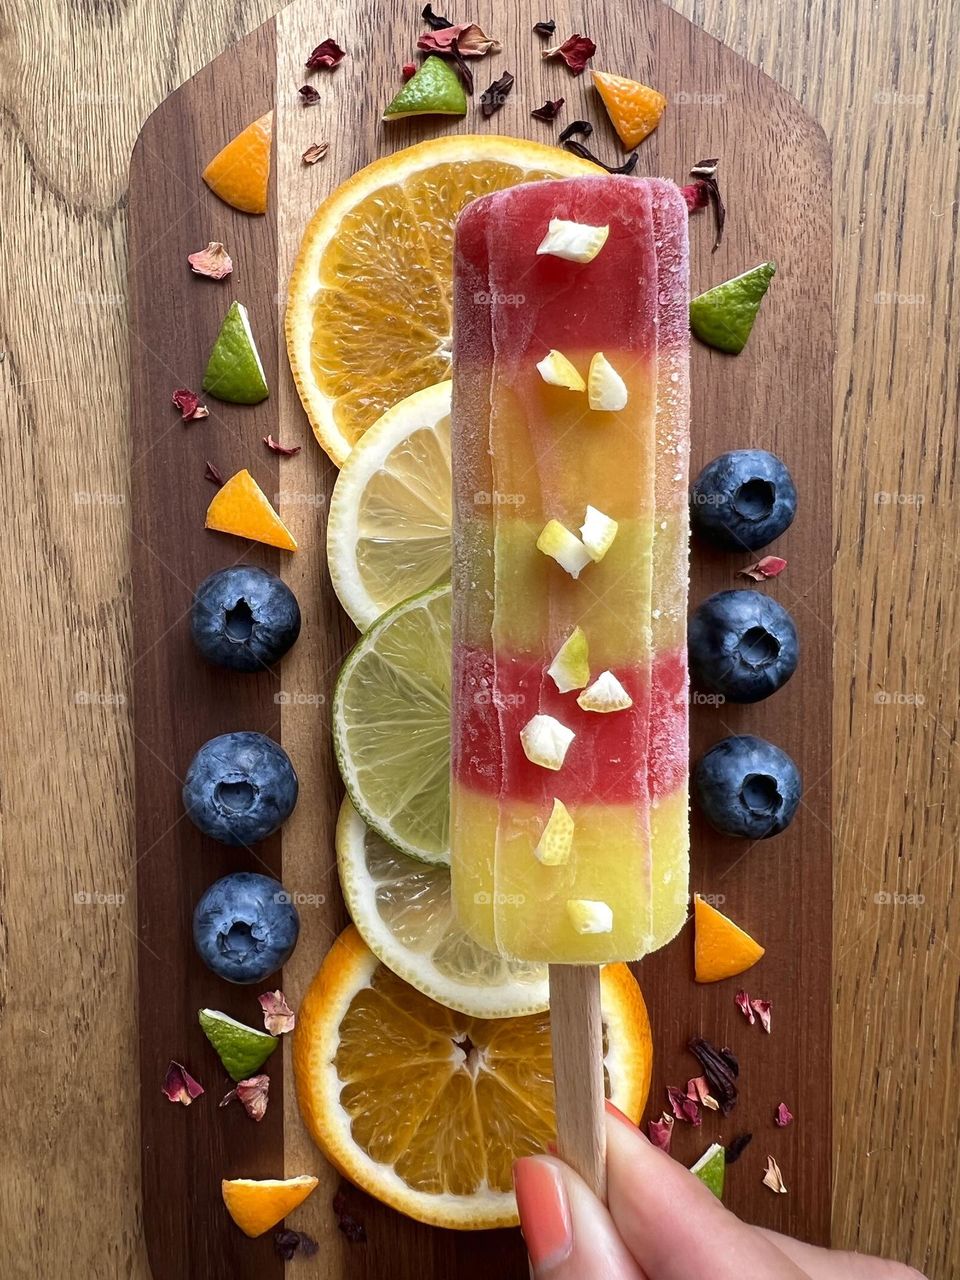 Summer treats, summer time, summer mood. Delicious juicy and freshly lollies and tasty fruits with blueberries. Good choice for hot summer days. Refreshing snacks. 